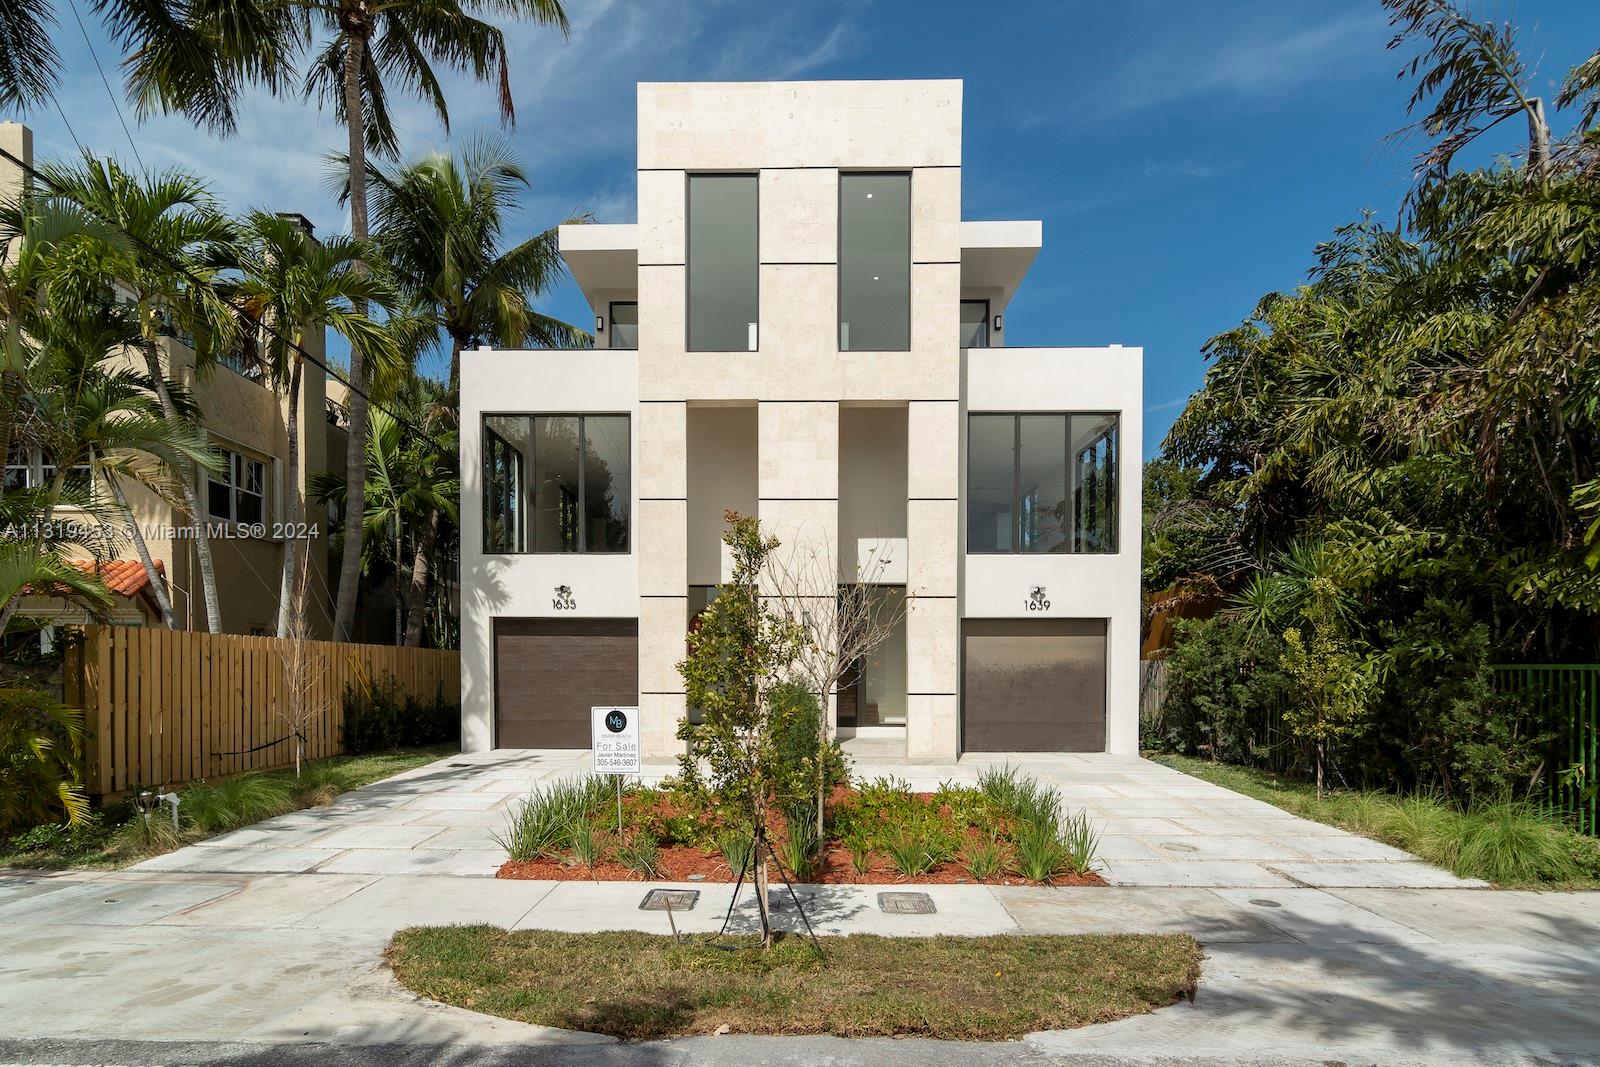 NEW CONSTRUCTION !!! Blocks away from Las Olas Boulevard, downtown Fort Lauderdale and the beaches. Two 3 story residences with 3 bedroom and 2 and 1/2 bathroom. Private elevator. Total living areas of 3074. Private rooftop with plunge pool. Two covered garages. Great layout and design. Expected August 2023. Attachment available